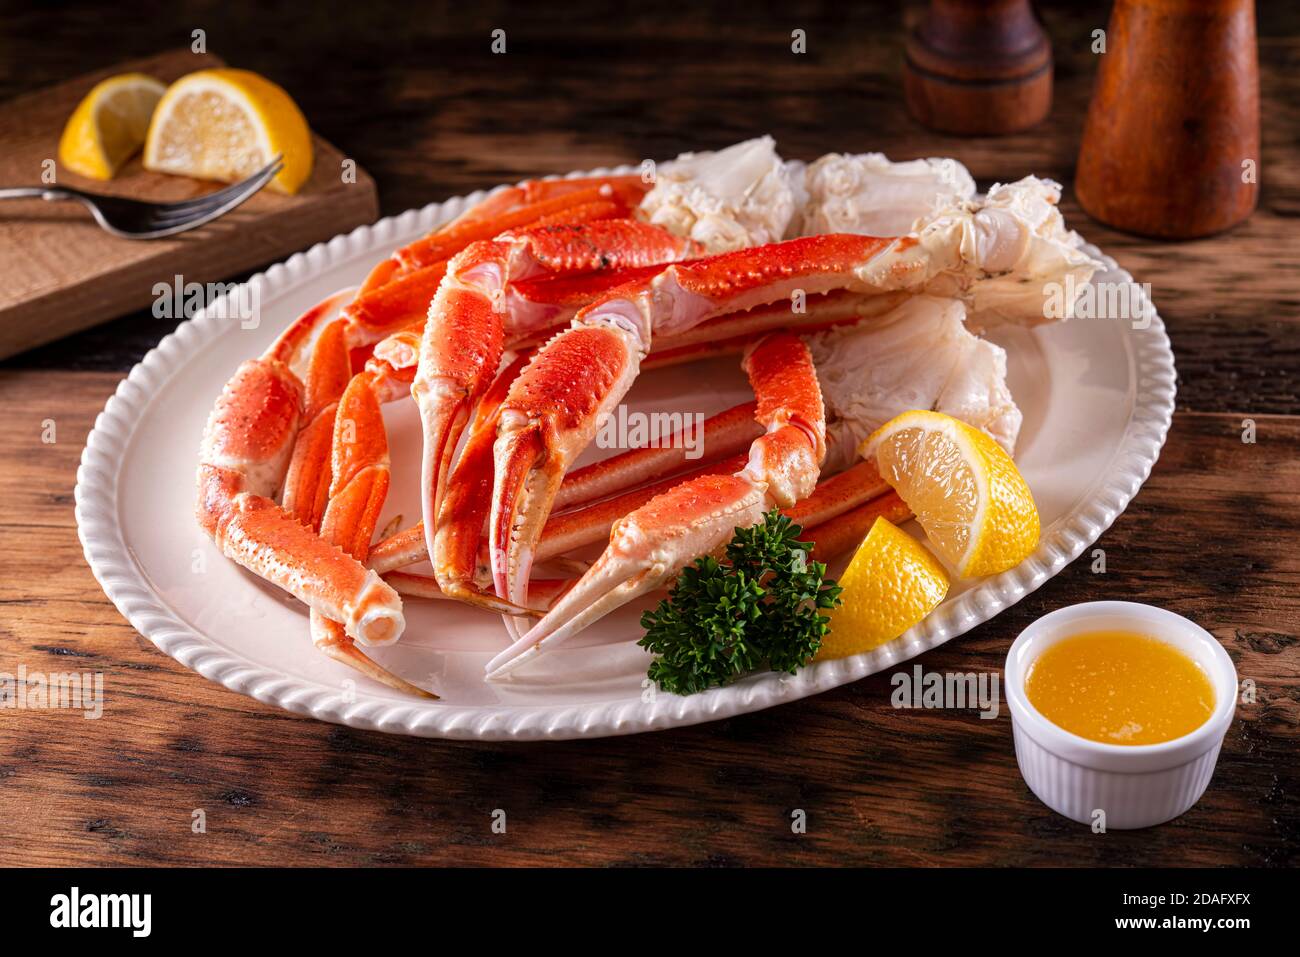 A plate of delicious snow crab leg clusters with lemon, parsley and melted butter. Stock Photo